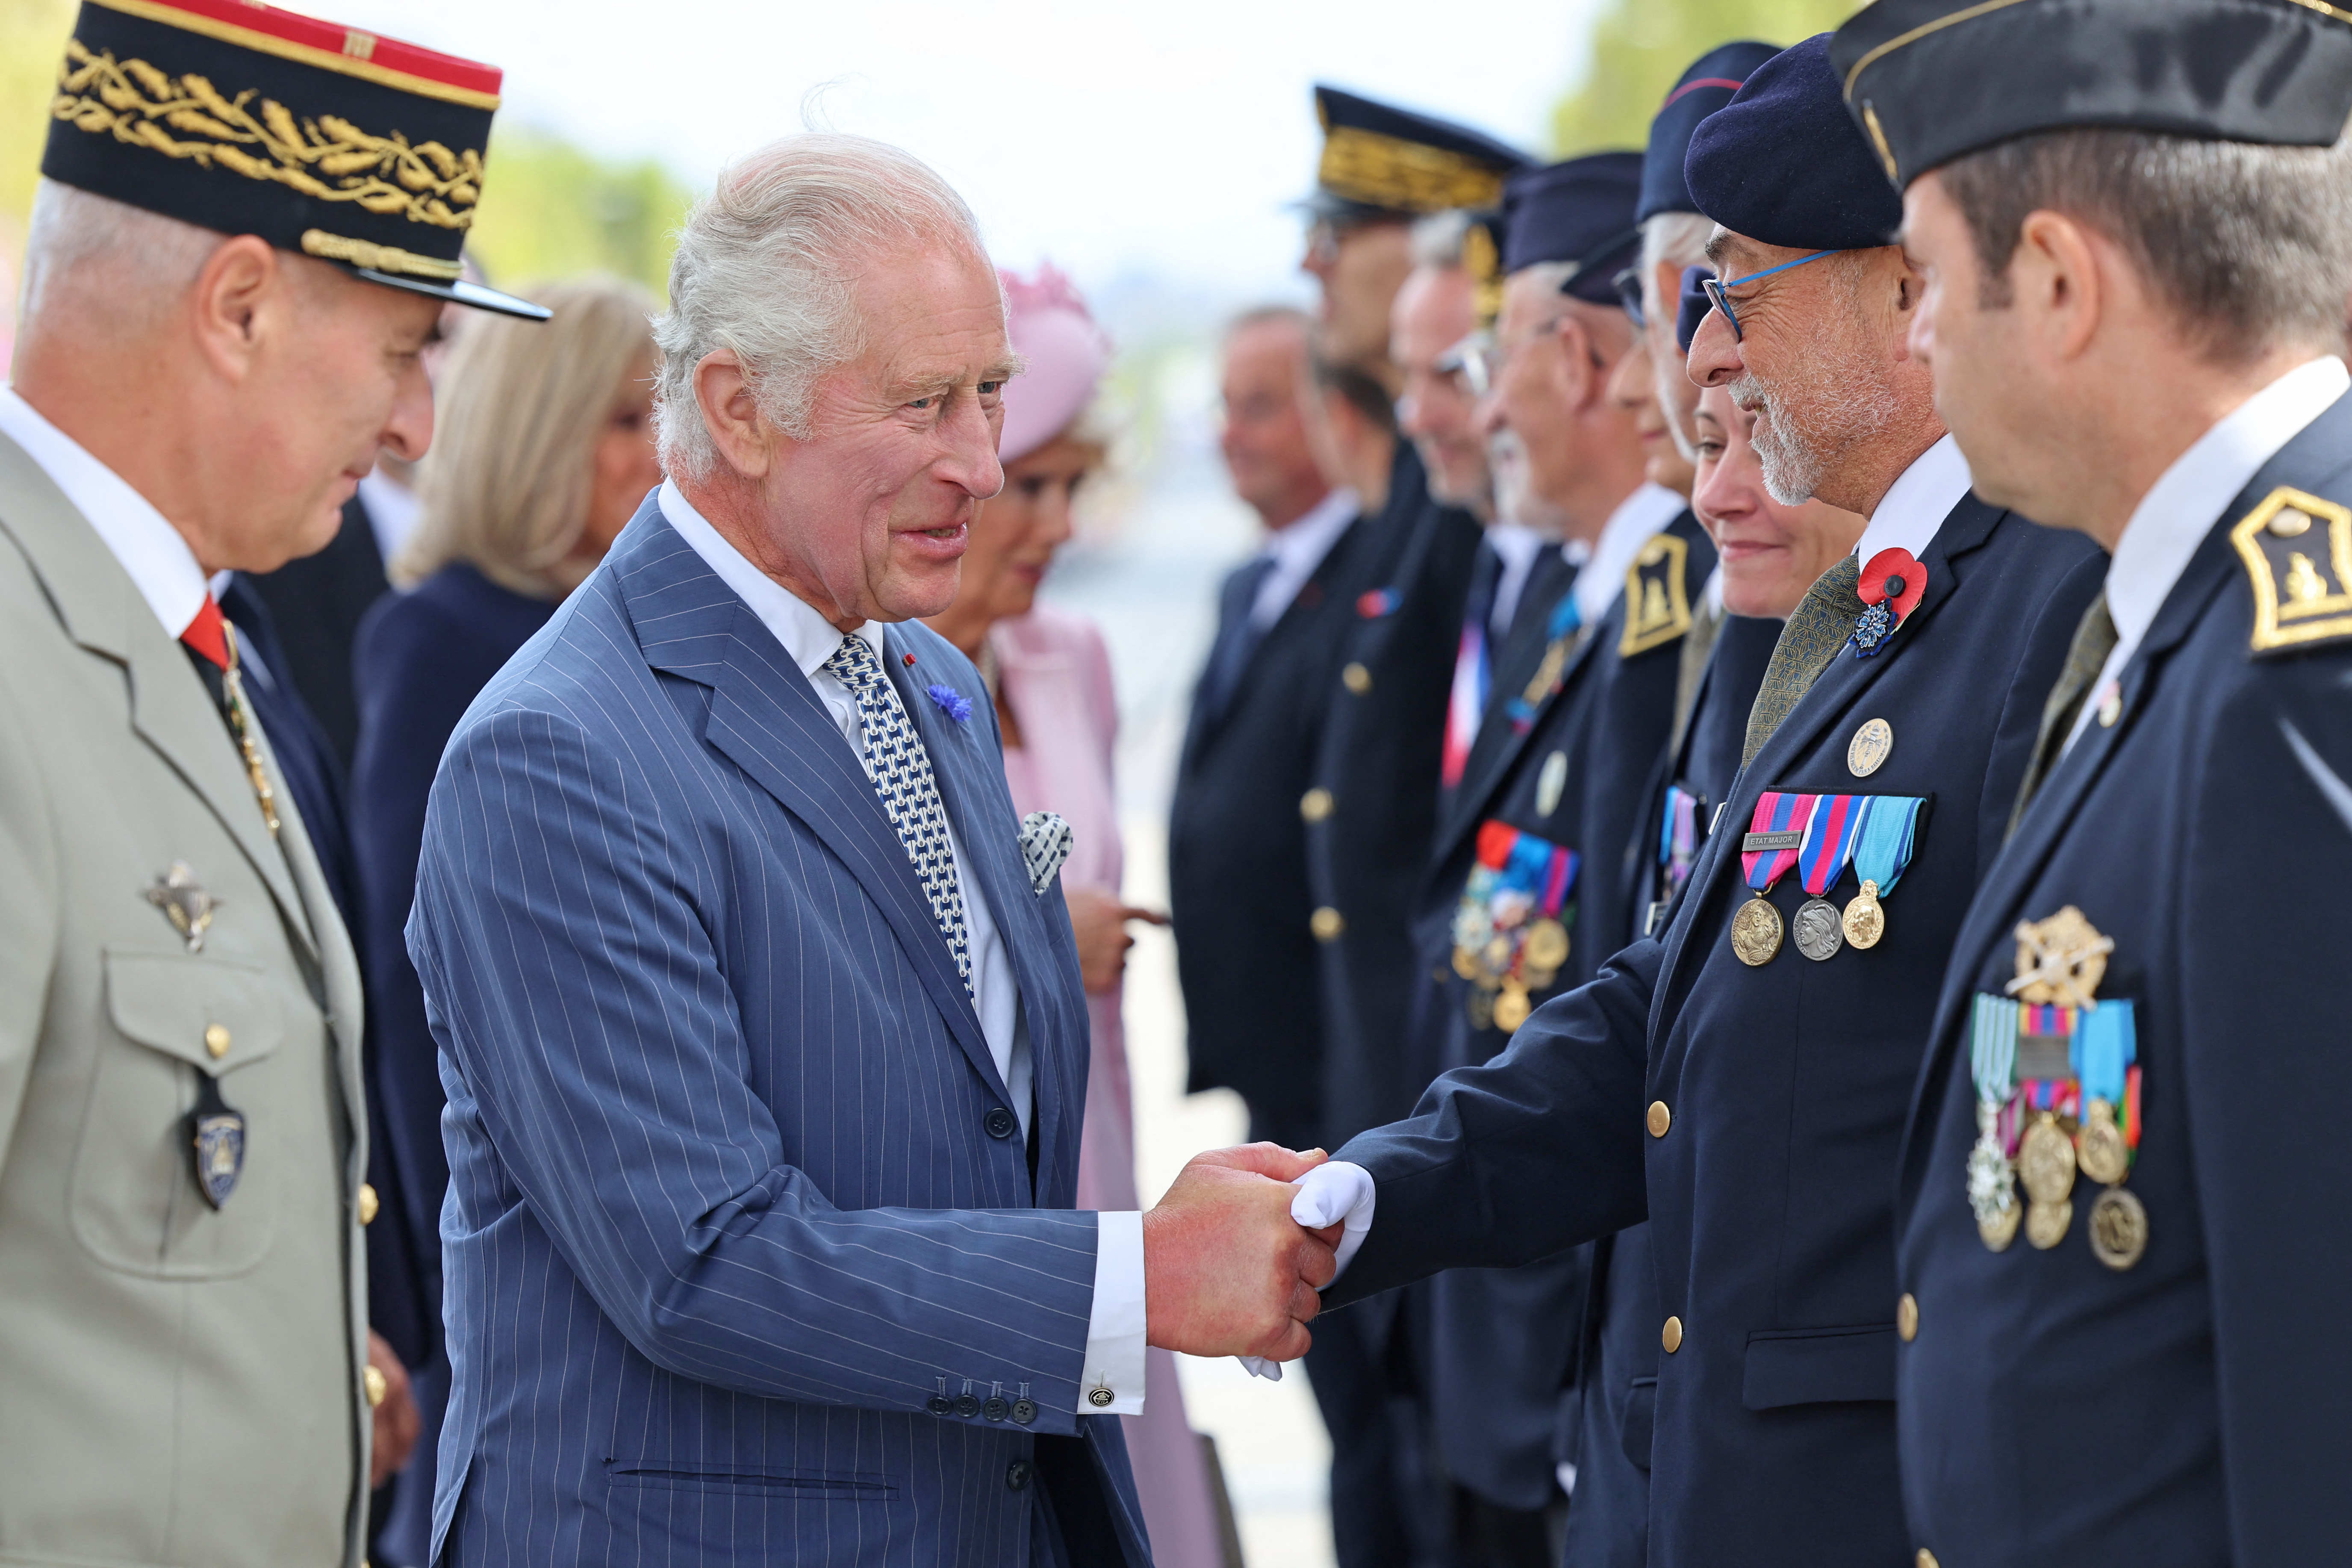 King Charles III shakes hands with members of veterans associations during an official welcoming ceremony at the Arc de Triomphe in Paris on September 20, 2023, on the first day of a state visit to France | Source: Getty Images